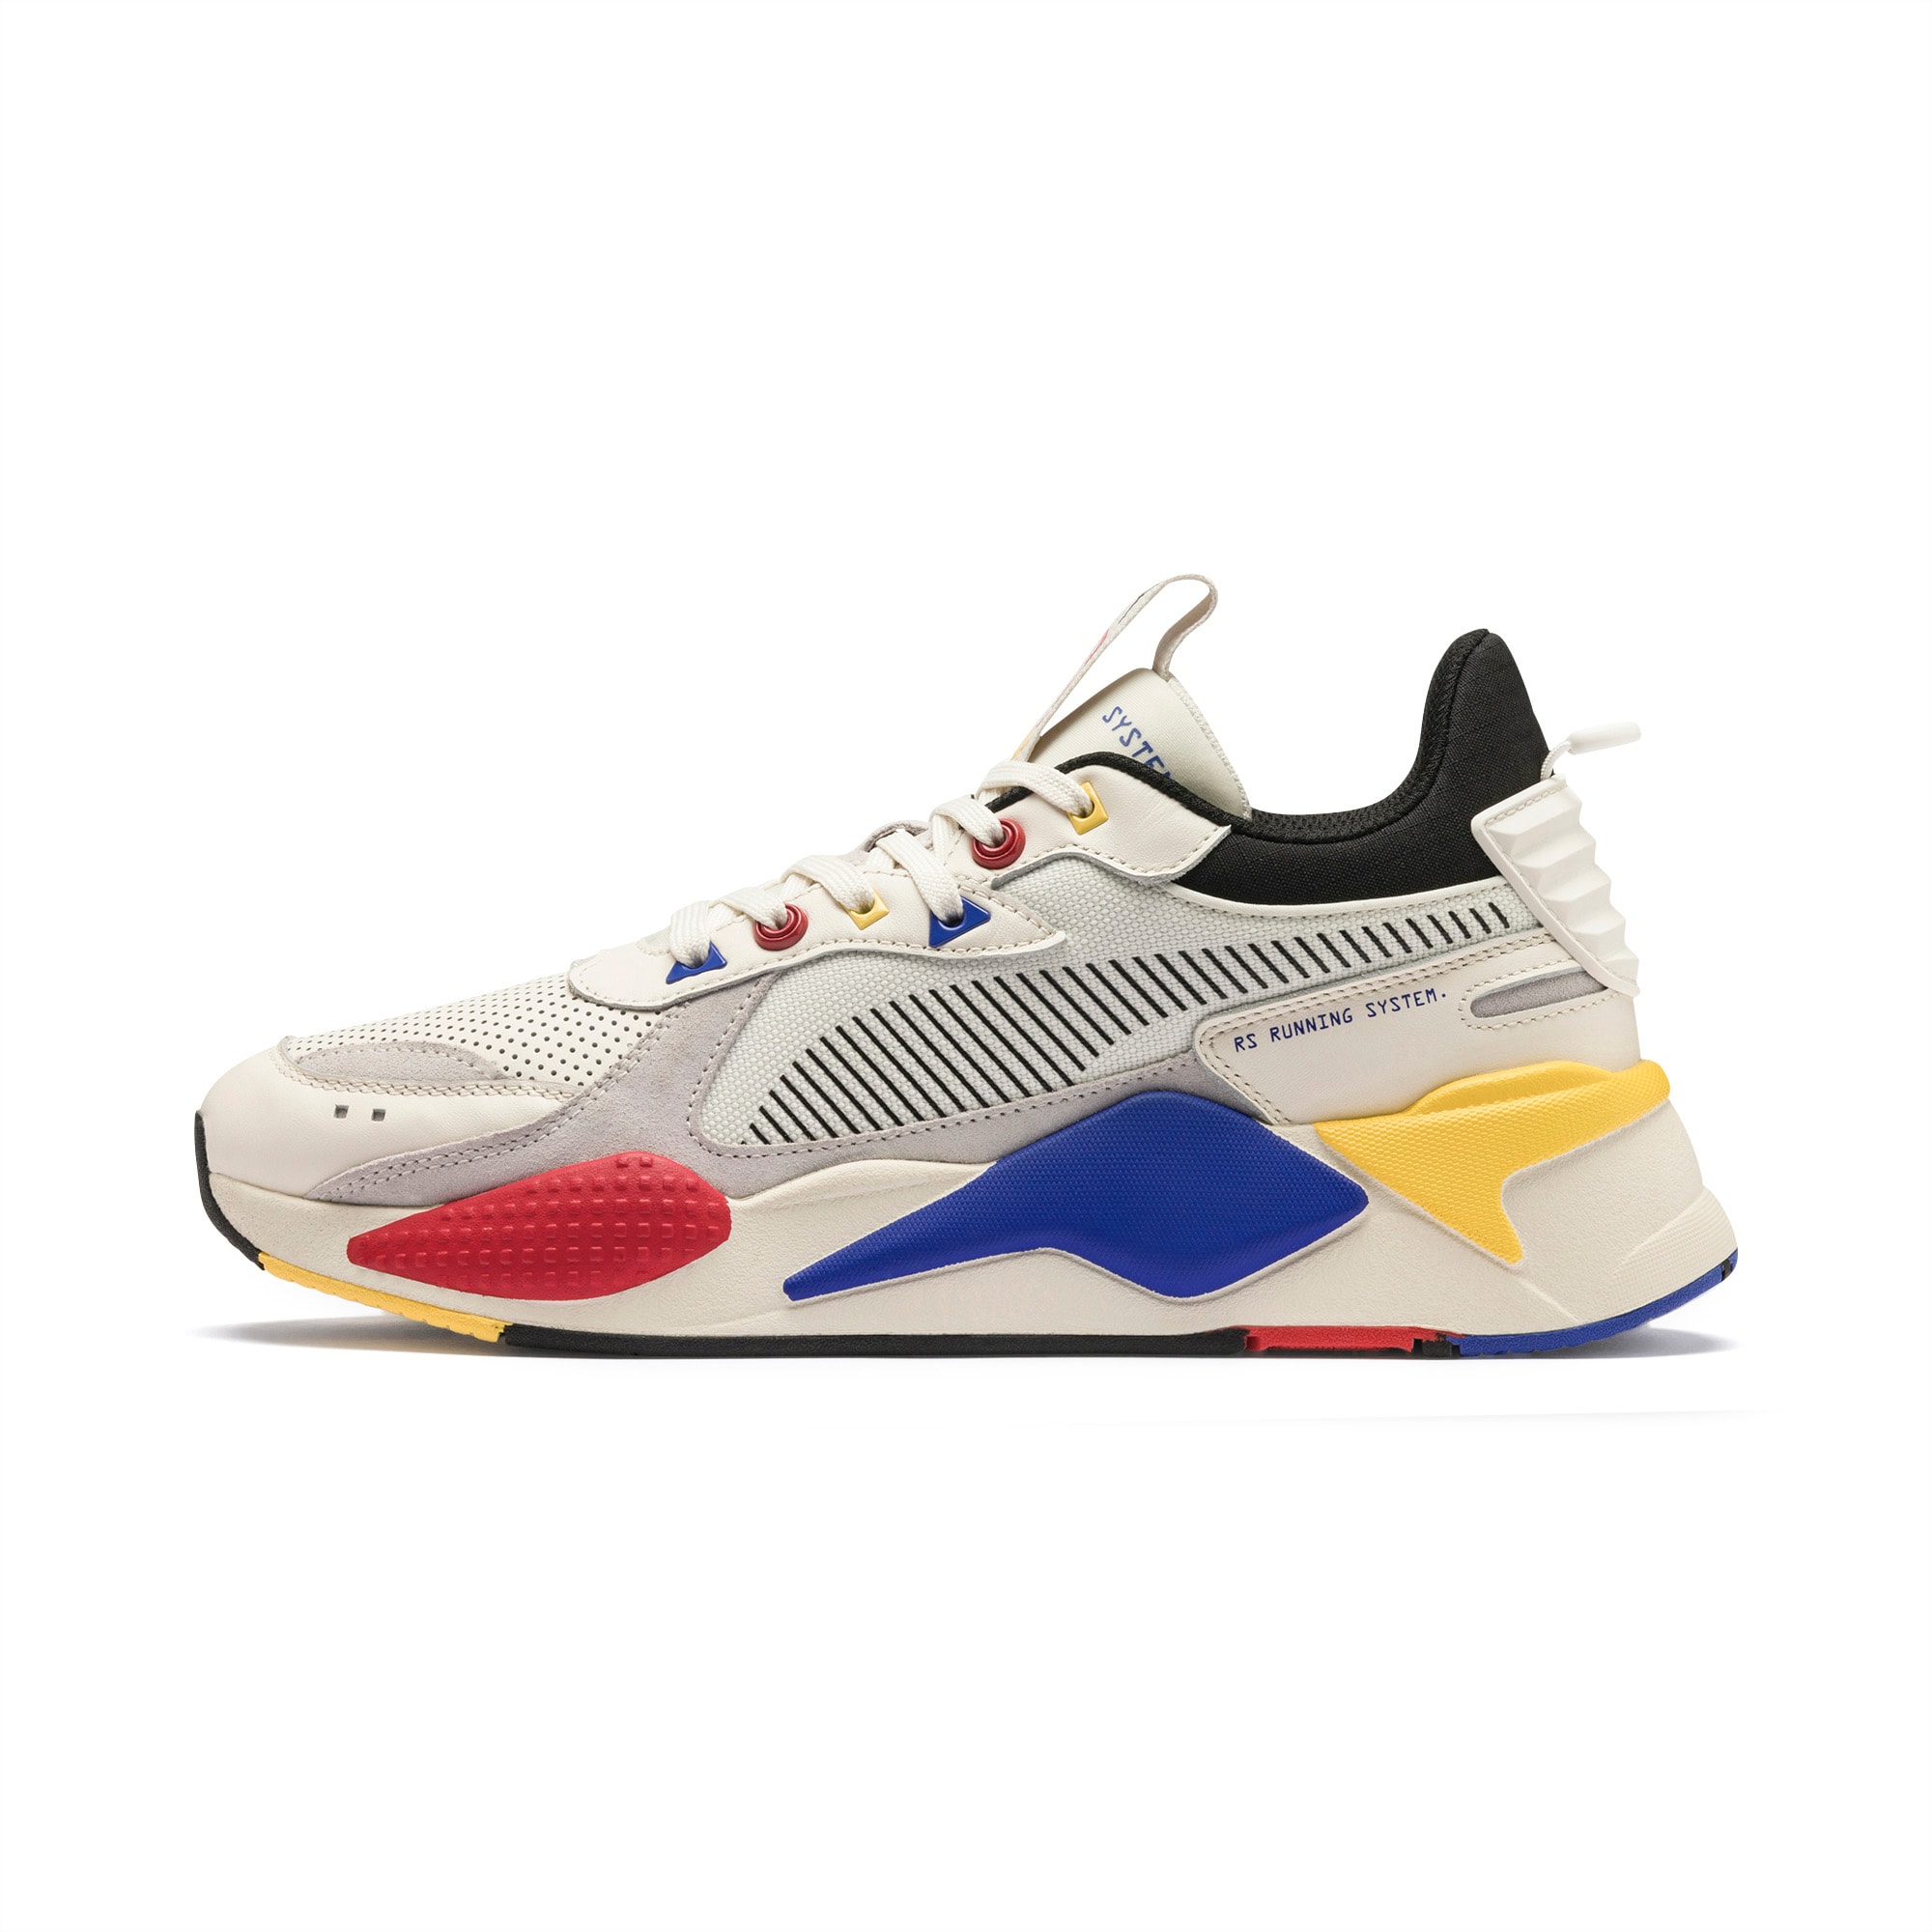 puma rs running system homme